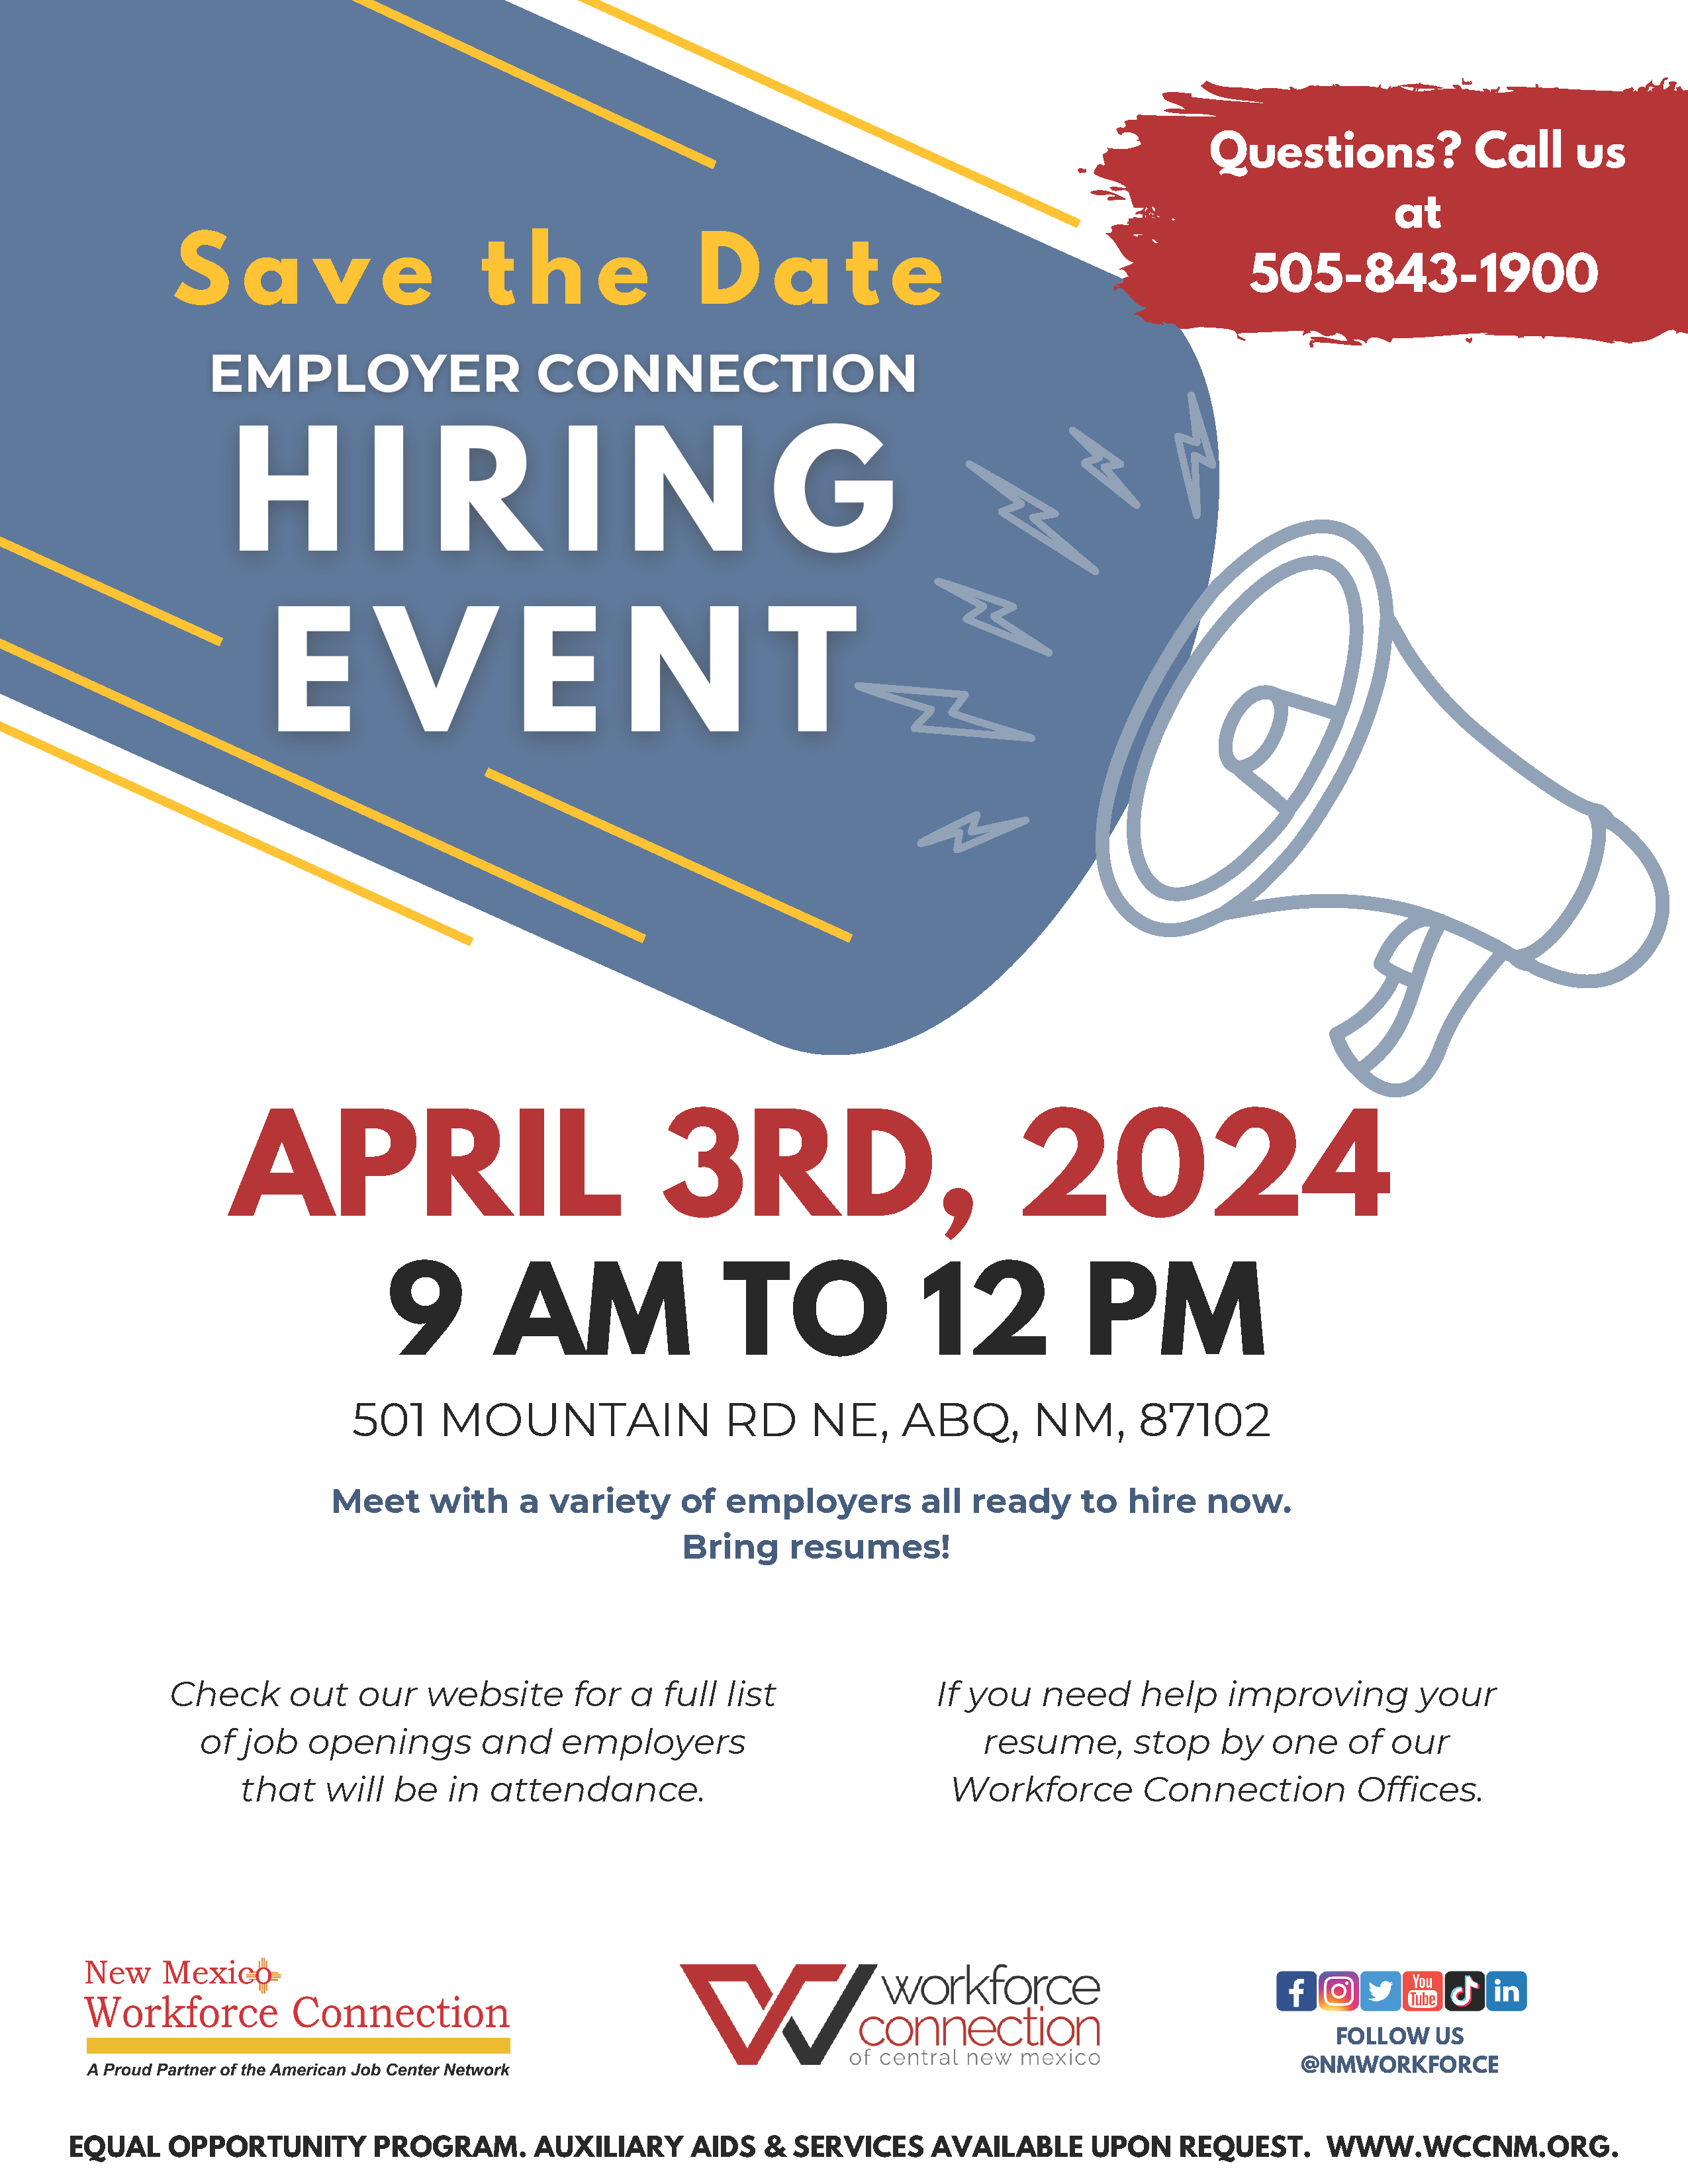 Save the Date Employer Connection Hiring Event flyer